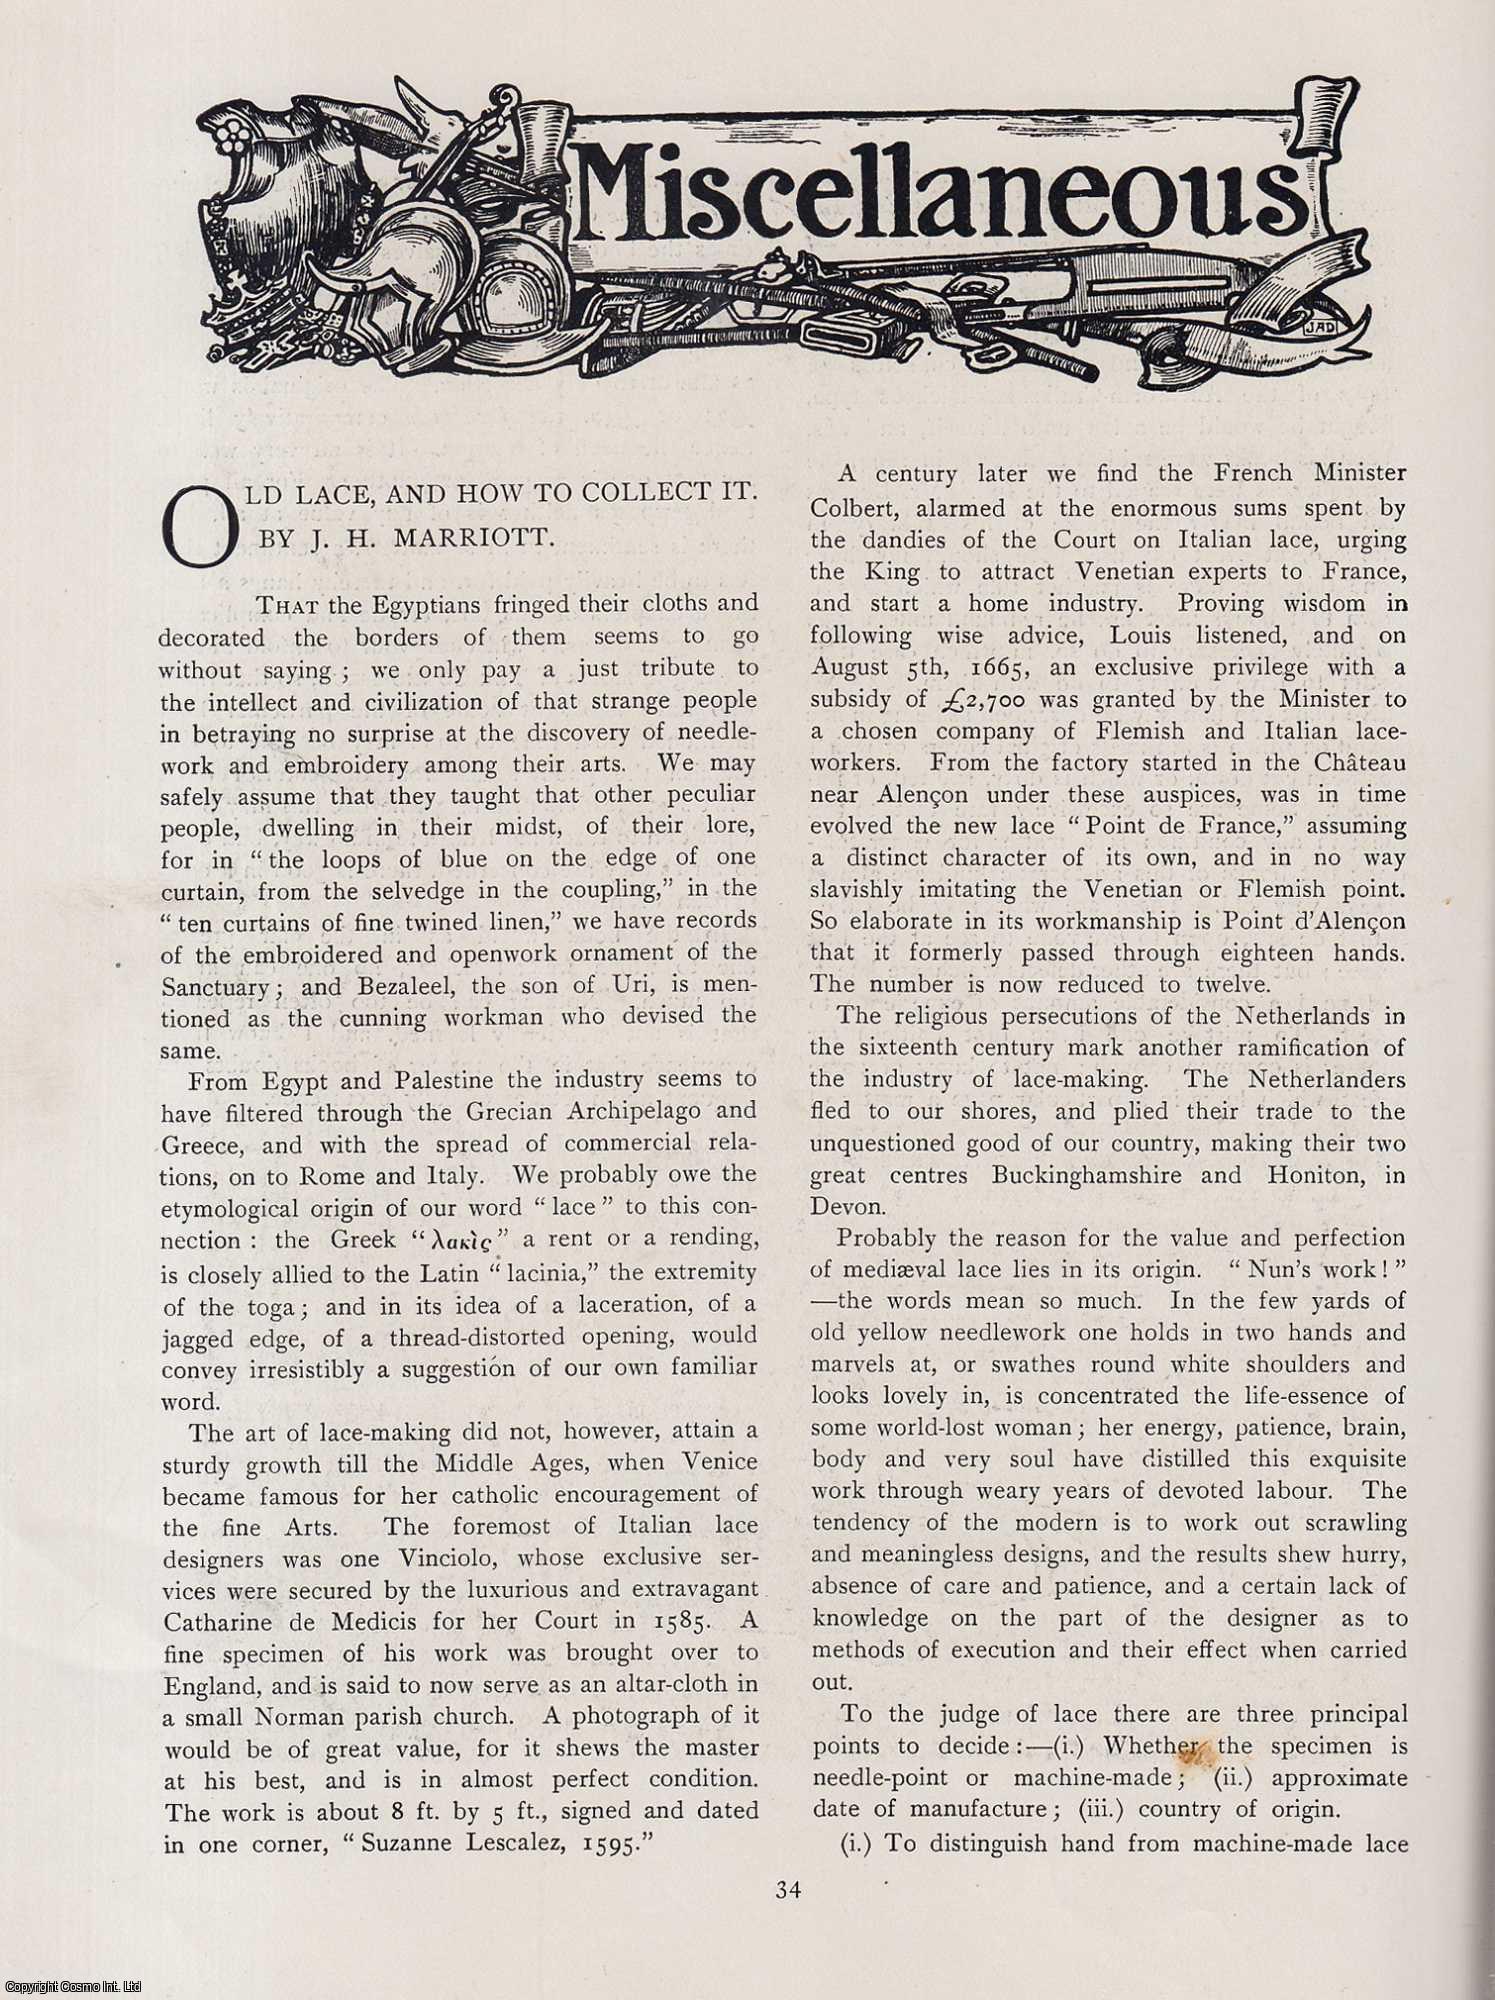 Marriott - Old Lace and How to Collect it. An original article from The Connoisseur, 1901.